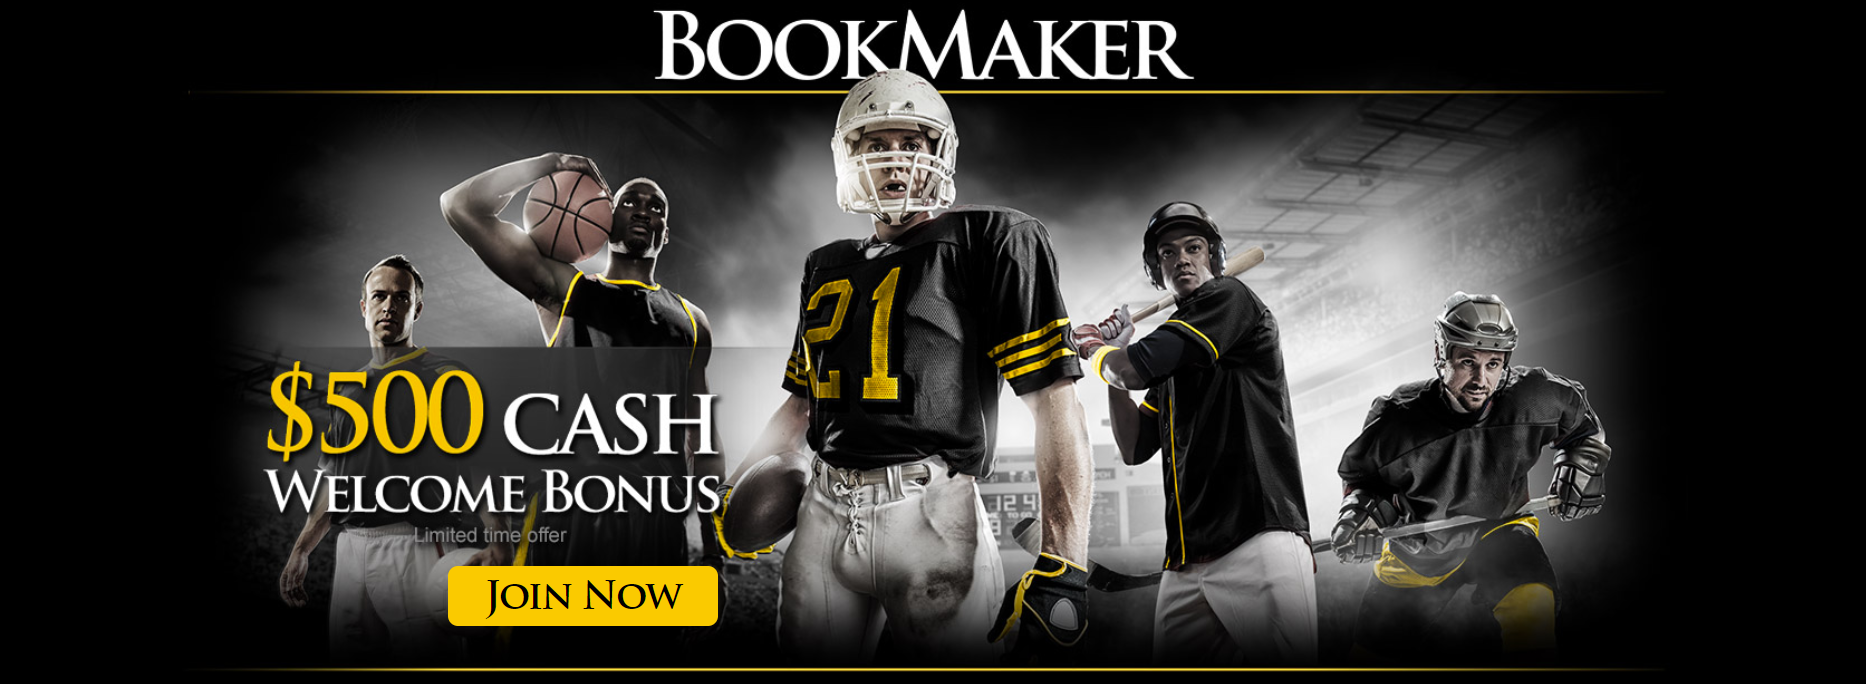 Bookmaker Sportsbook Review